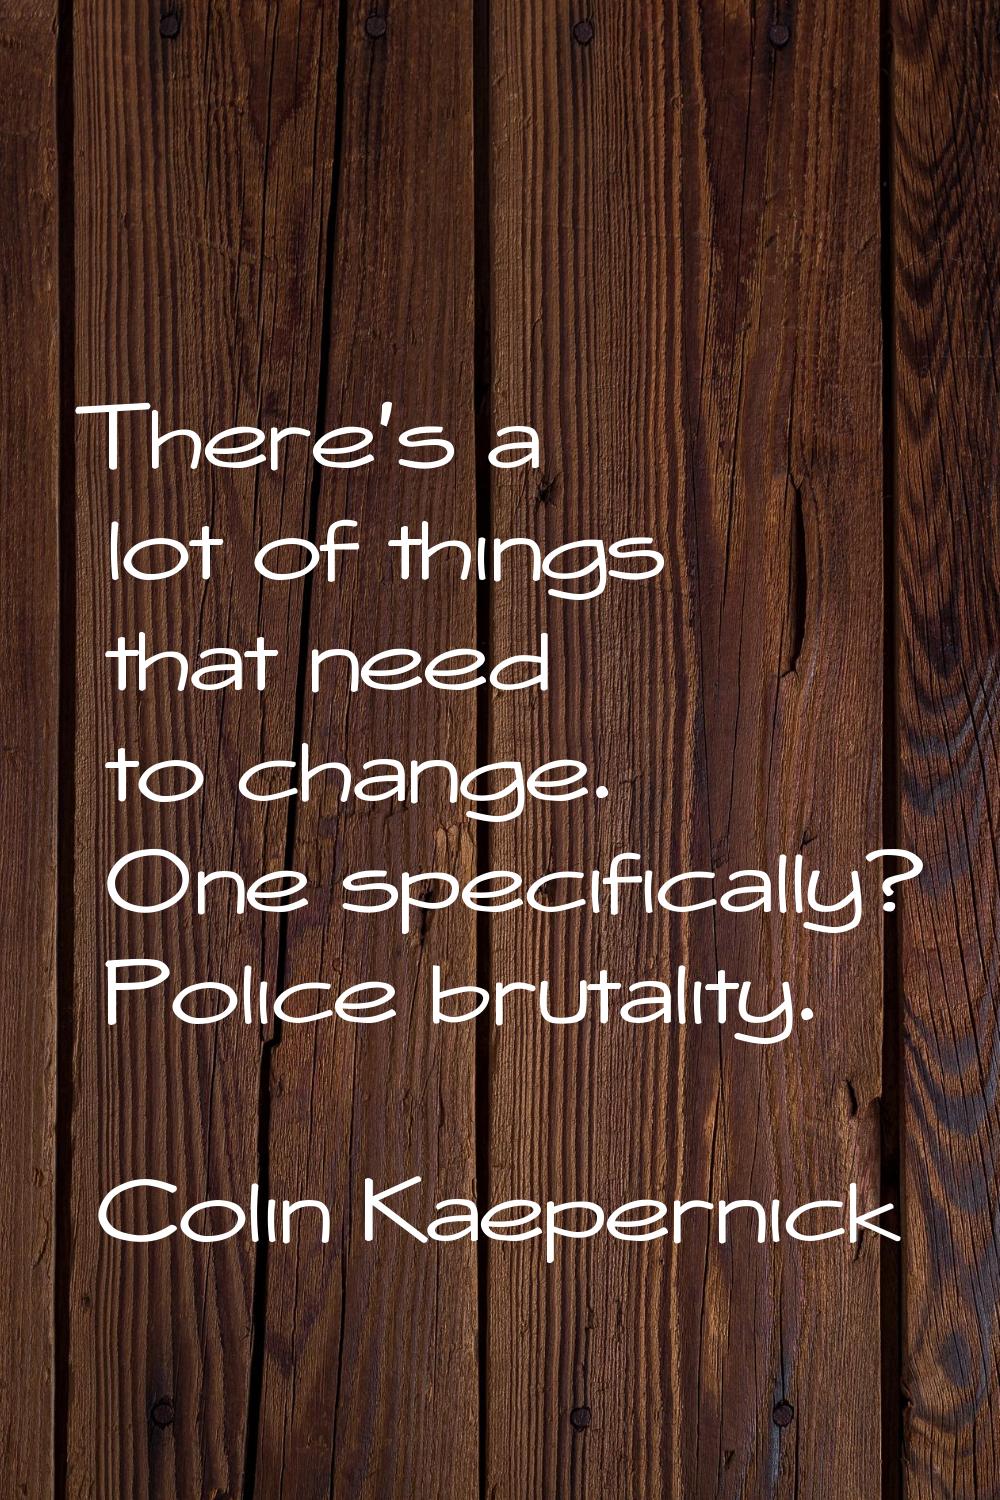 There's a lot of things that need to change. One specifically? Police brutality.